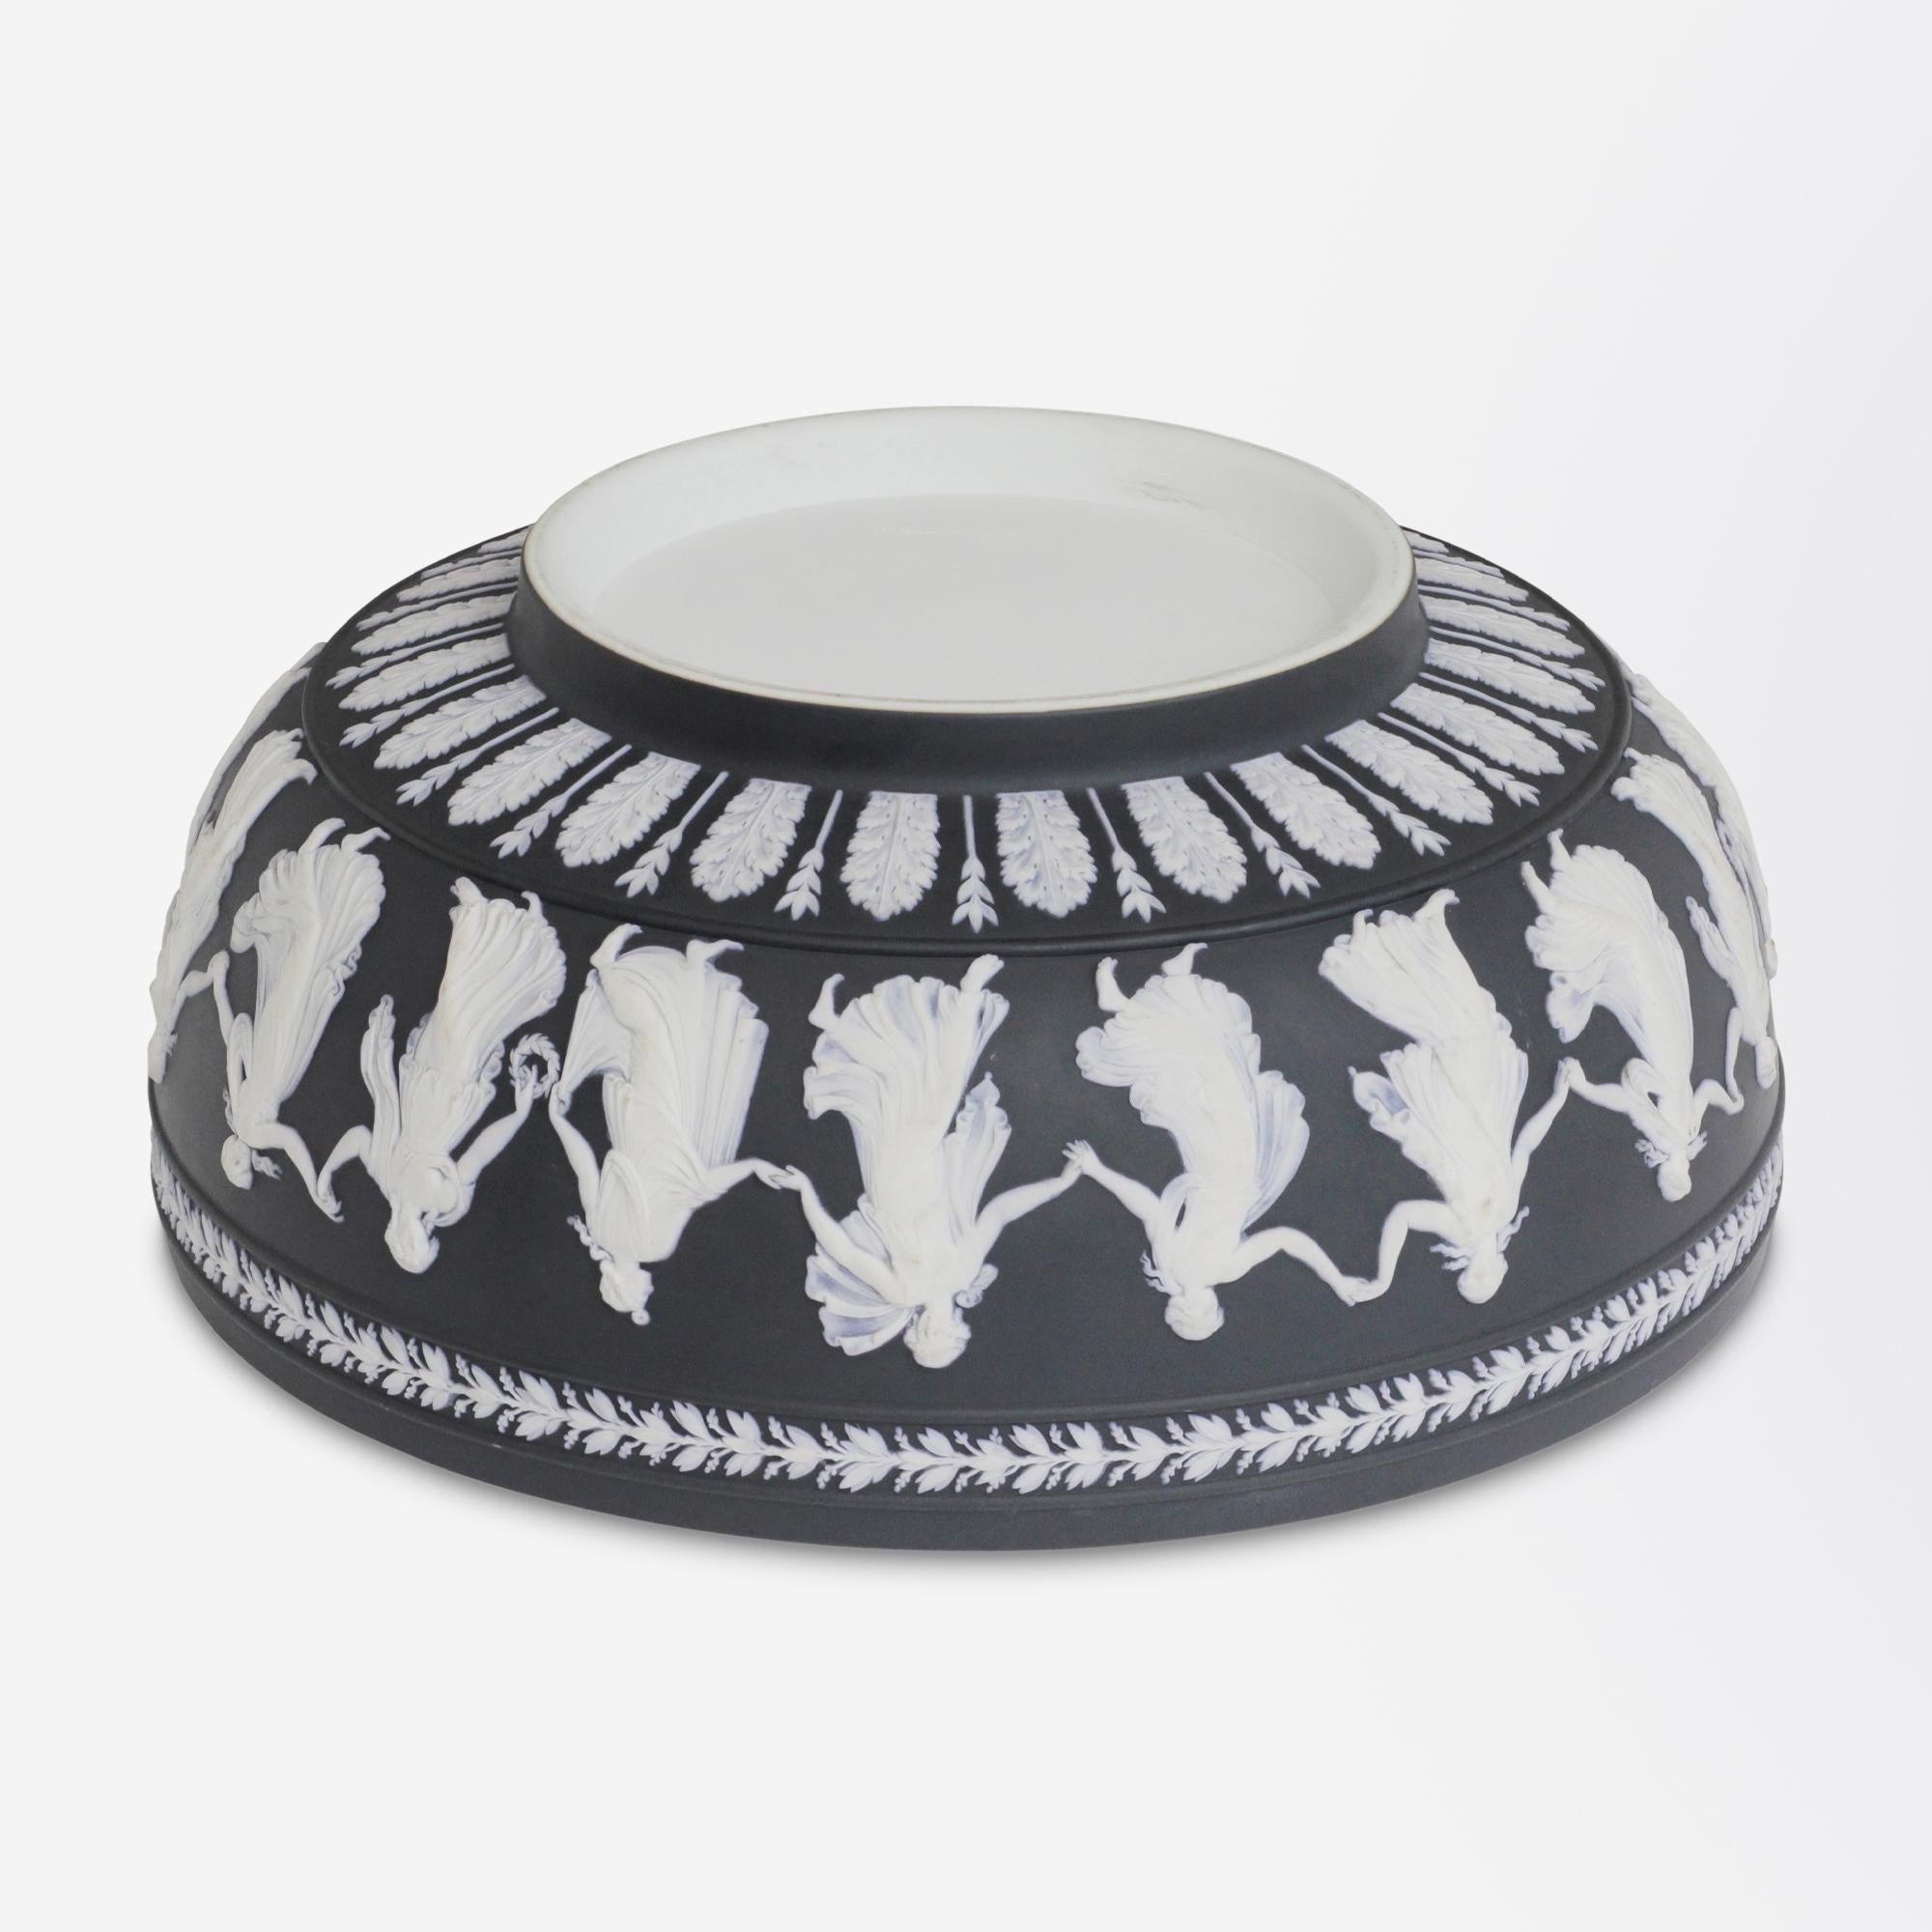 A fine black jasper-ware bowl crafted by Wedgwood in a design known as the 'Dancing Hours'. The black basalt wash over white jasper piece dates to the 1950s and has been handmade in England. The design dates to the 18th century by John Flaxman